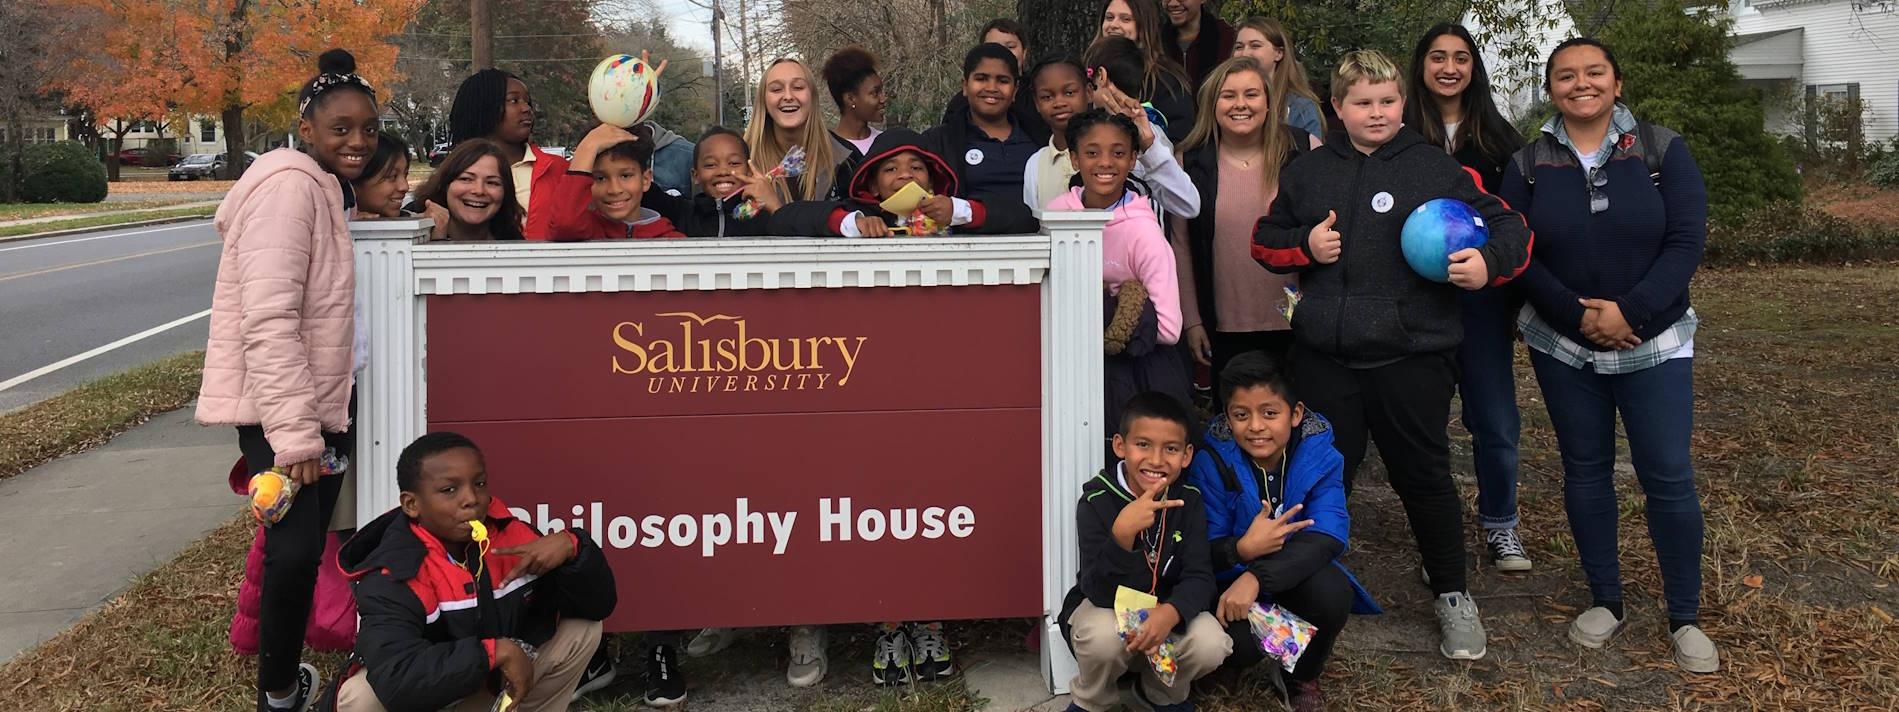 Students by the Philosophy House sign